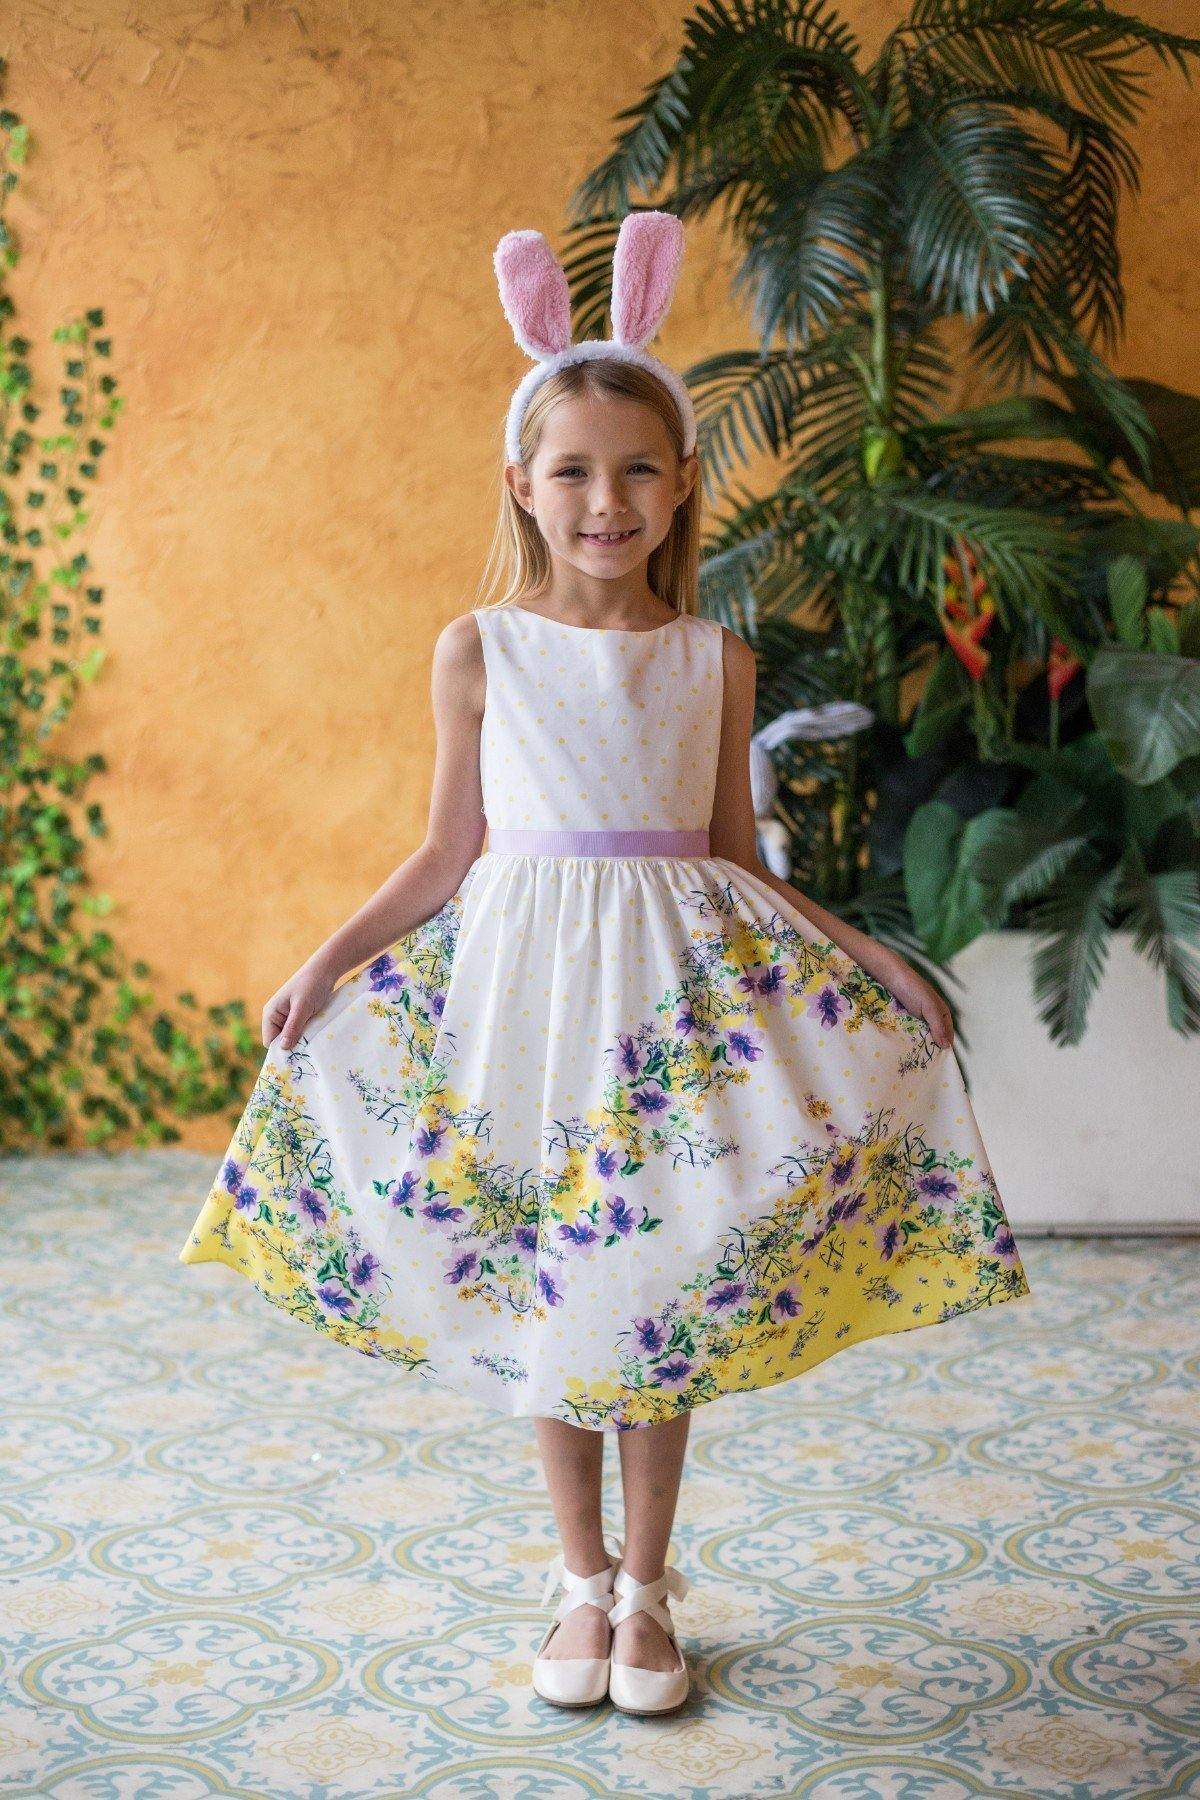 Chevron Floral Cotton Dress-Kid's Dream-Color_Coral,color_Yellow,easter,fabric_ Cotton,length_Knee Length,meta-related-collection-shop-the-outfit-girls,Pink-collection,size_02,size_04,size_06,size_08,size_10,size_12